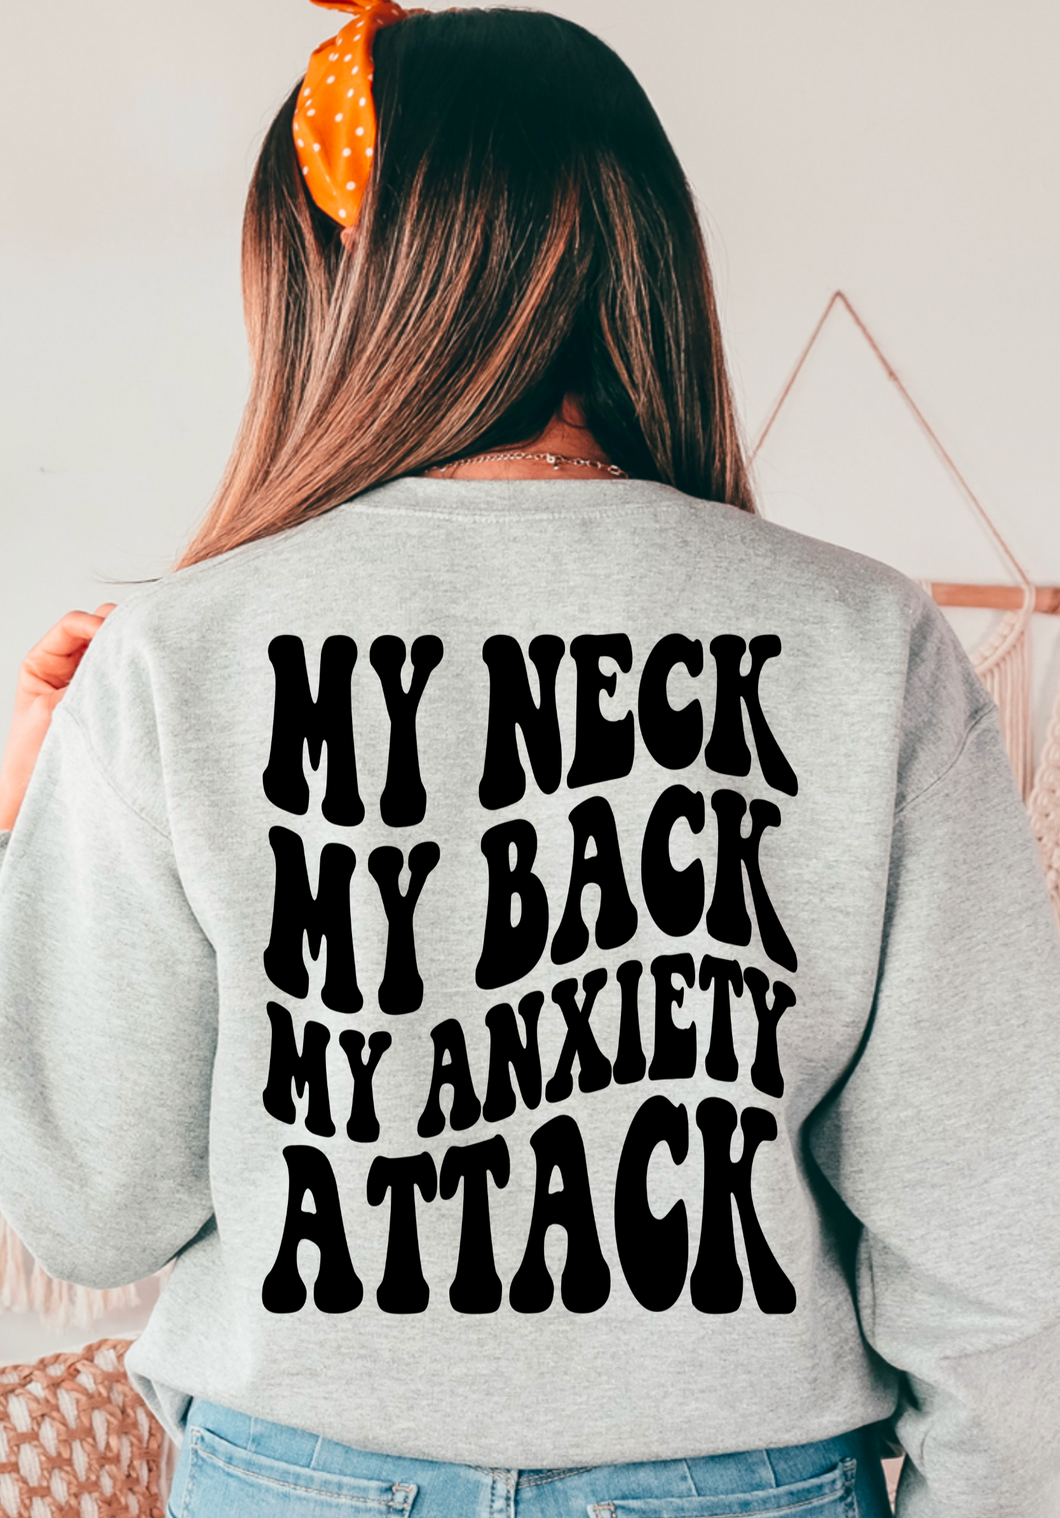 My neck, my back, my anxiety attack